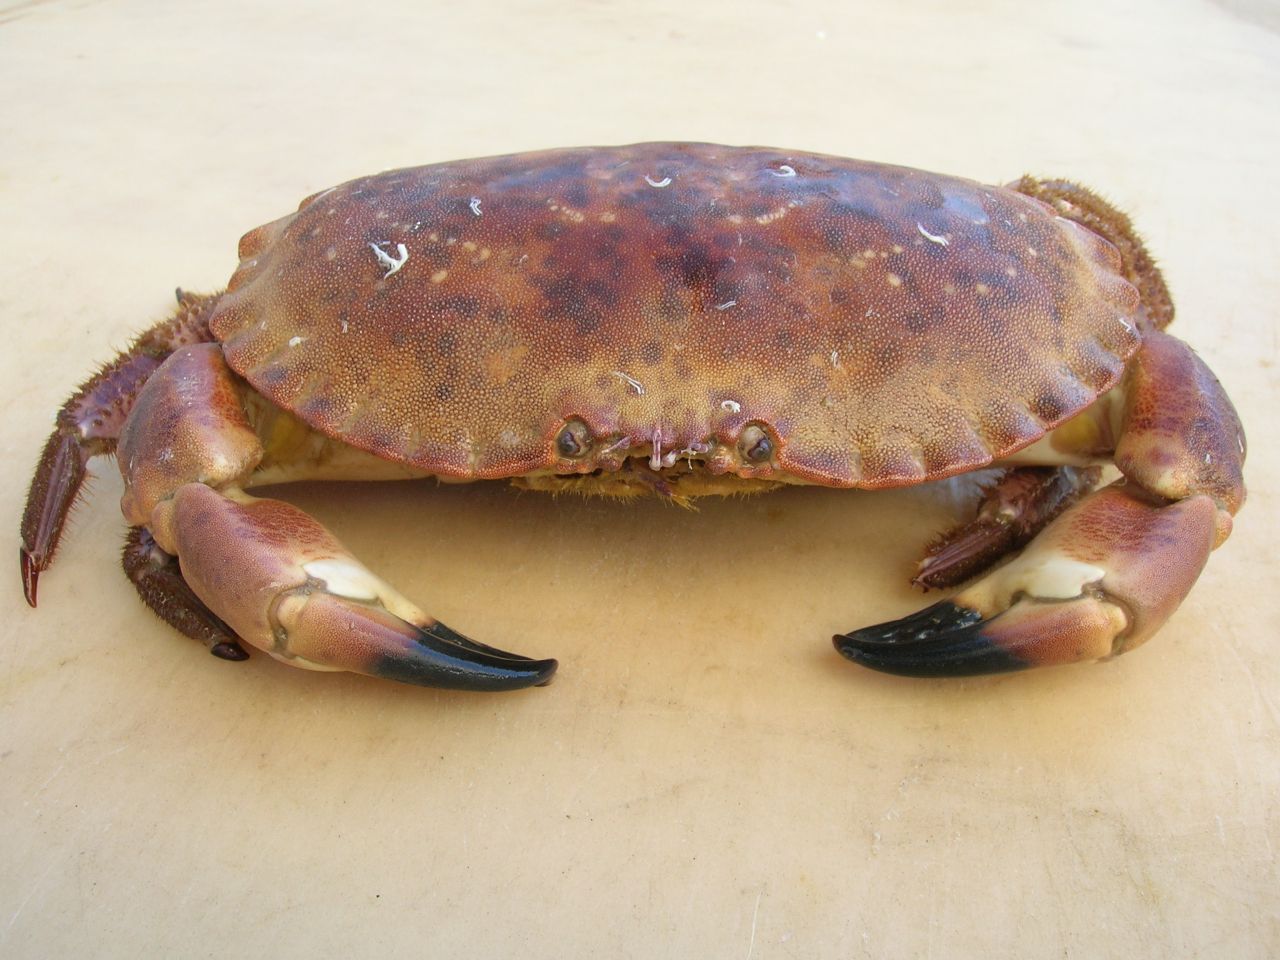 a big, large crab is sitting in the center of a picture